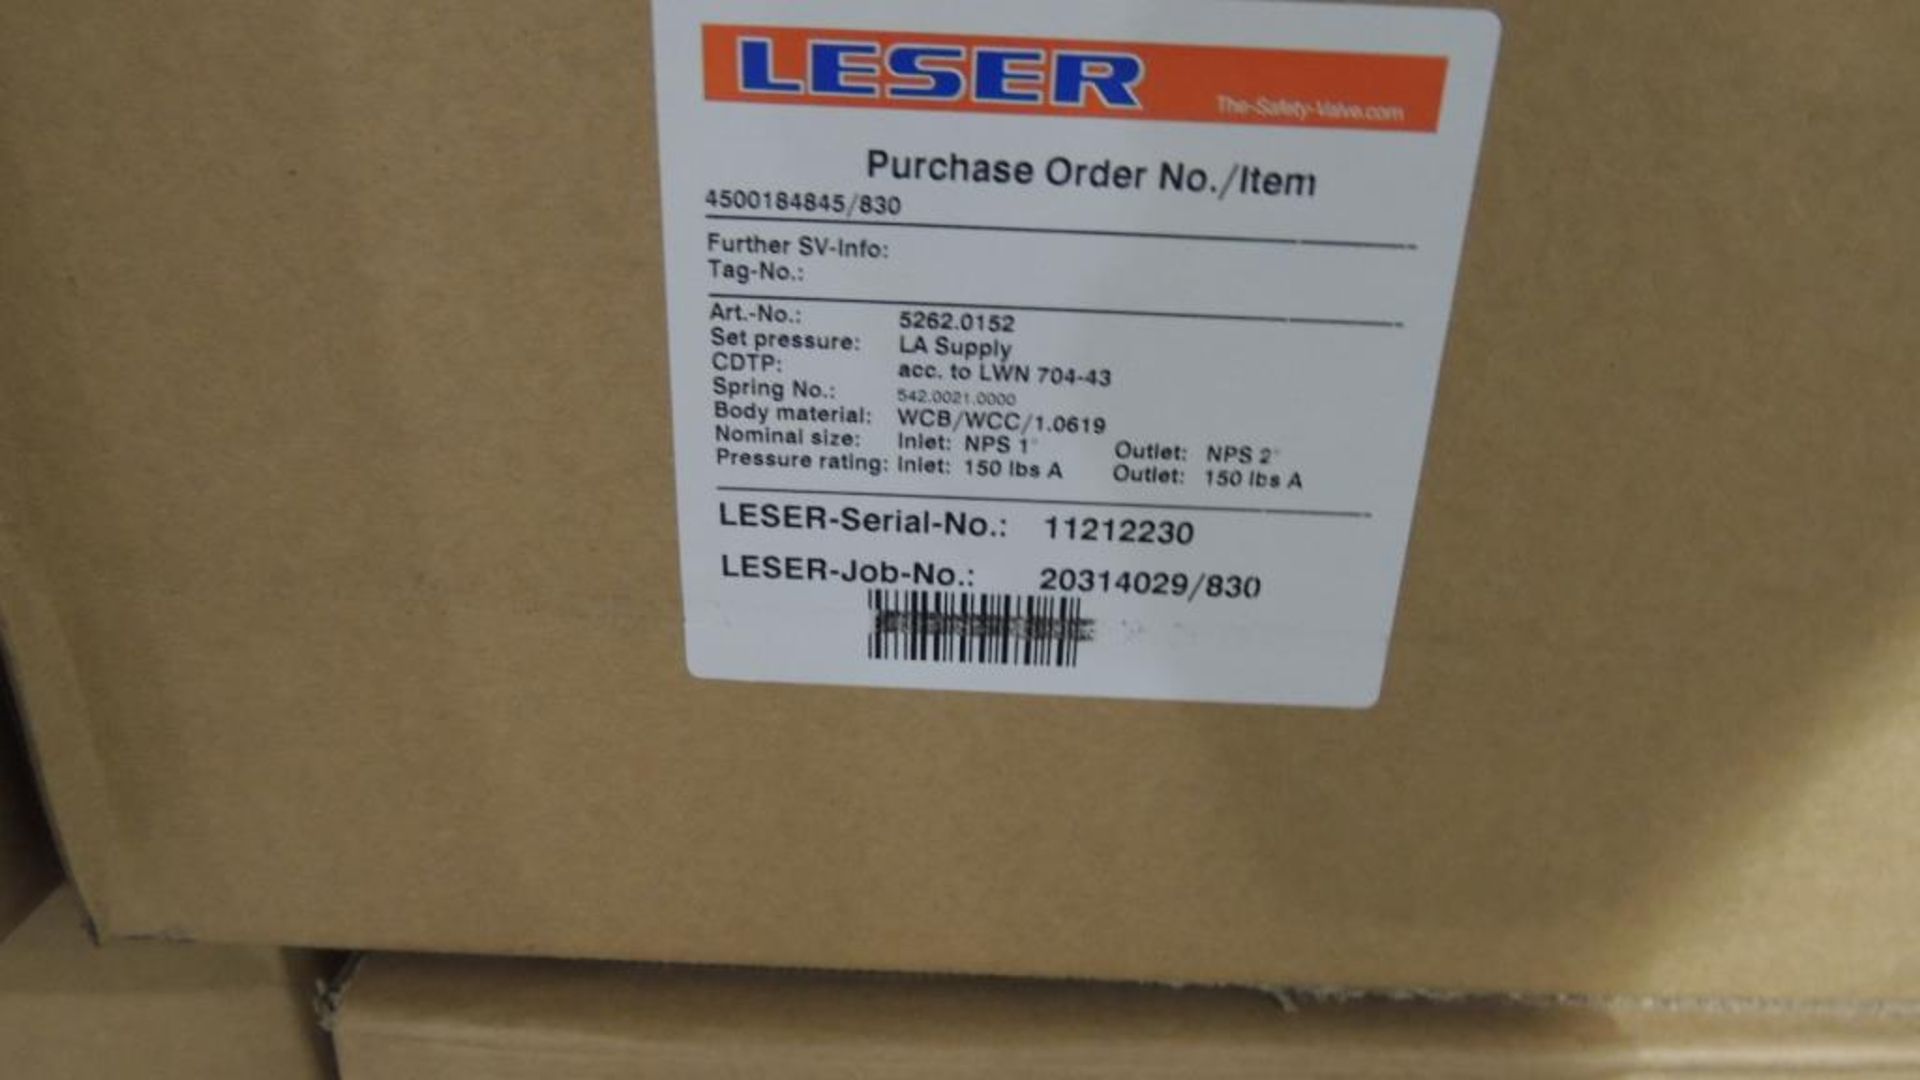 Large Quantity of Leser Relief and Safety Valves, plus Spare Parts Kits - Image 110 of 374